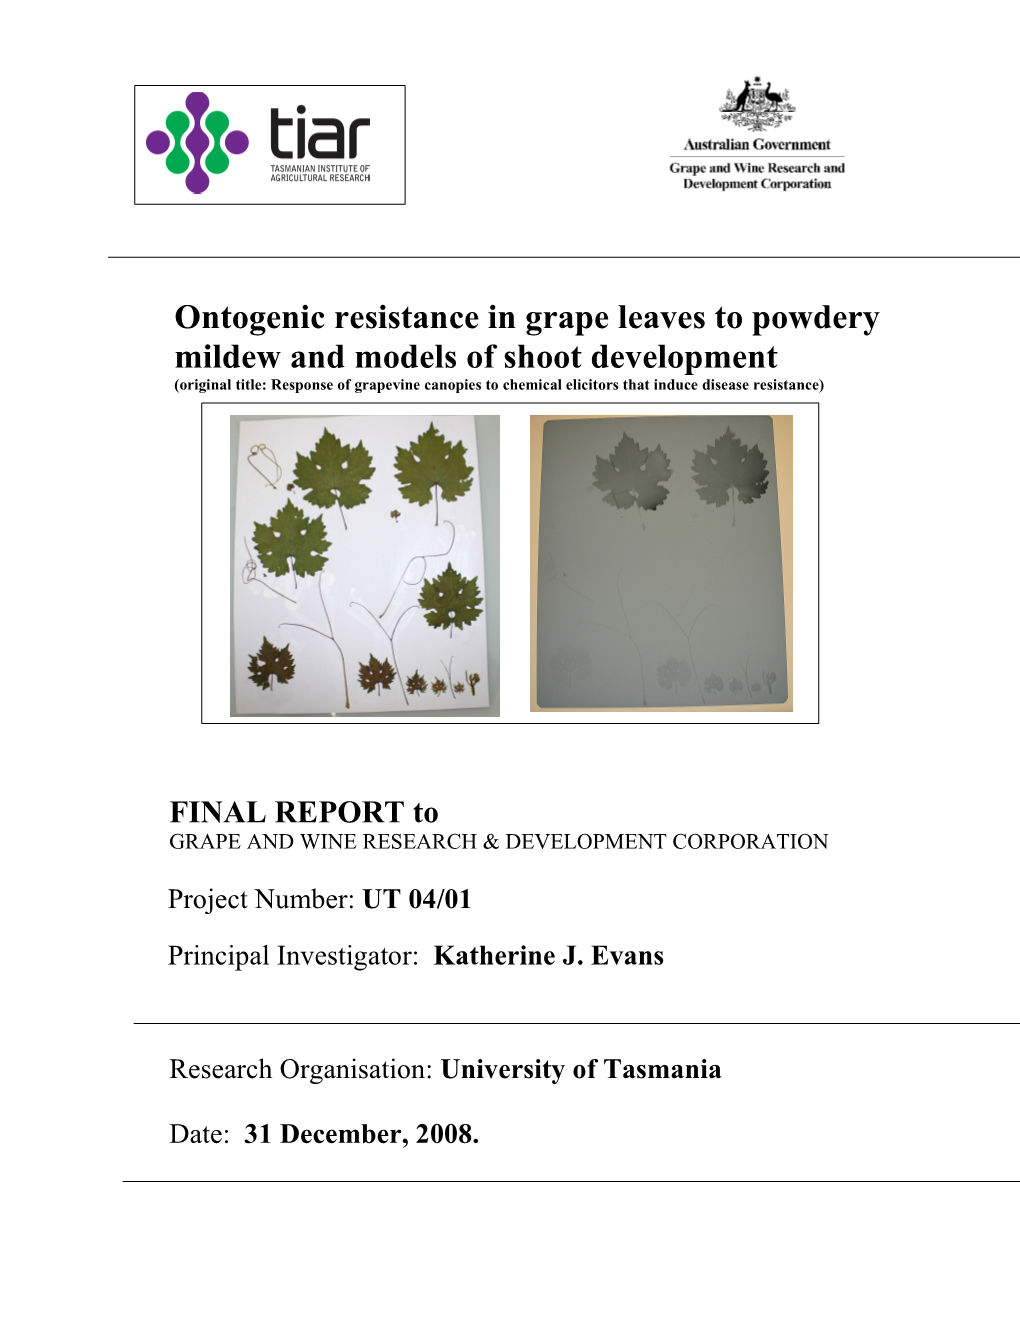 Ontogenic Resistance in Grape Leaves to Powdery Mildew and Models Of